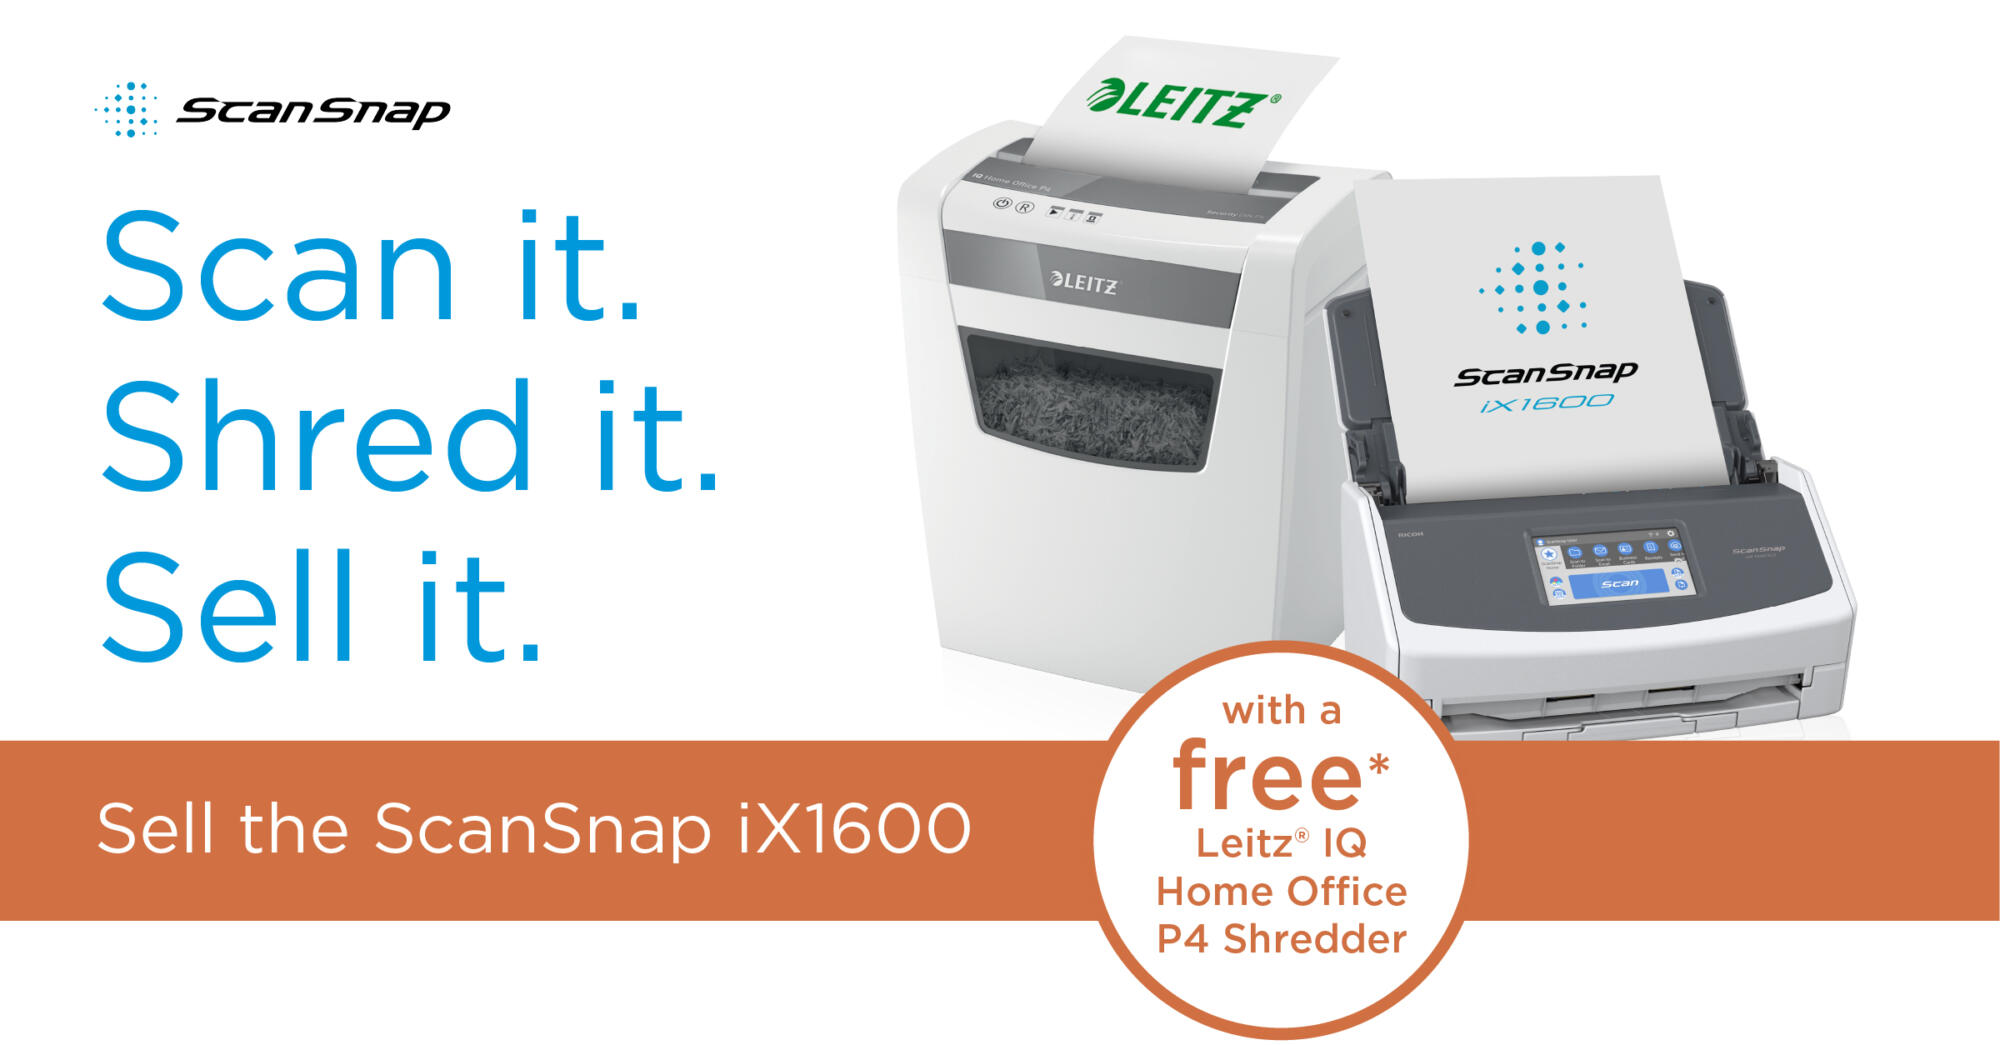 ScanSnap  Scan It Shred it Sell it Promo  ICP promo page banners  26.09.23 EN V1 High res